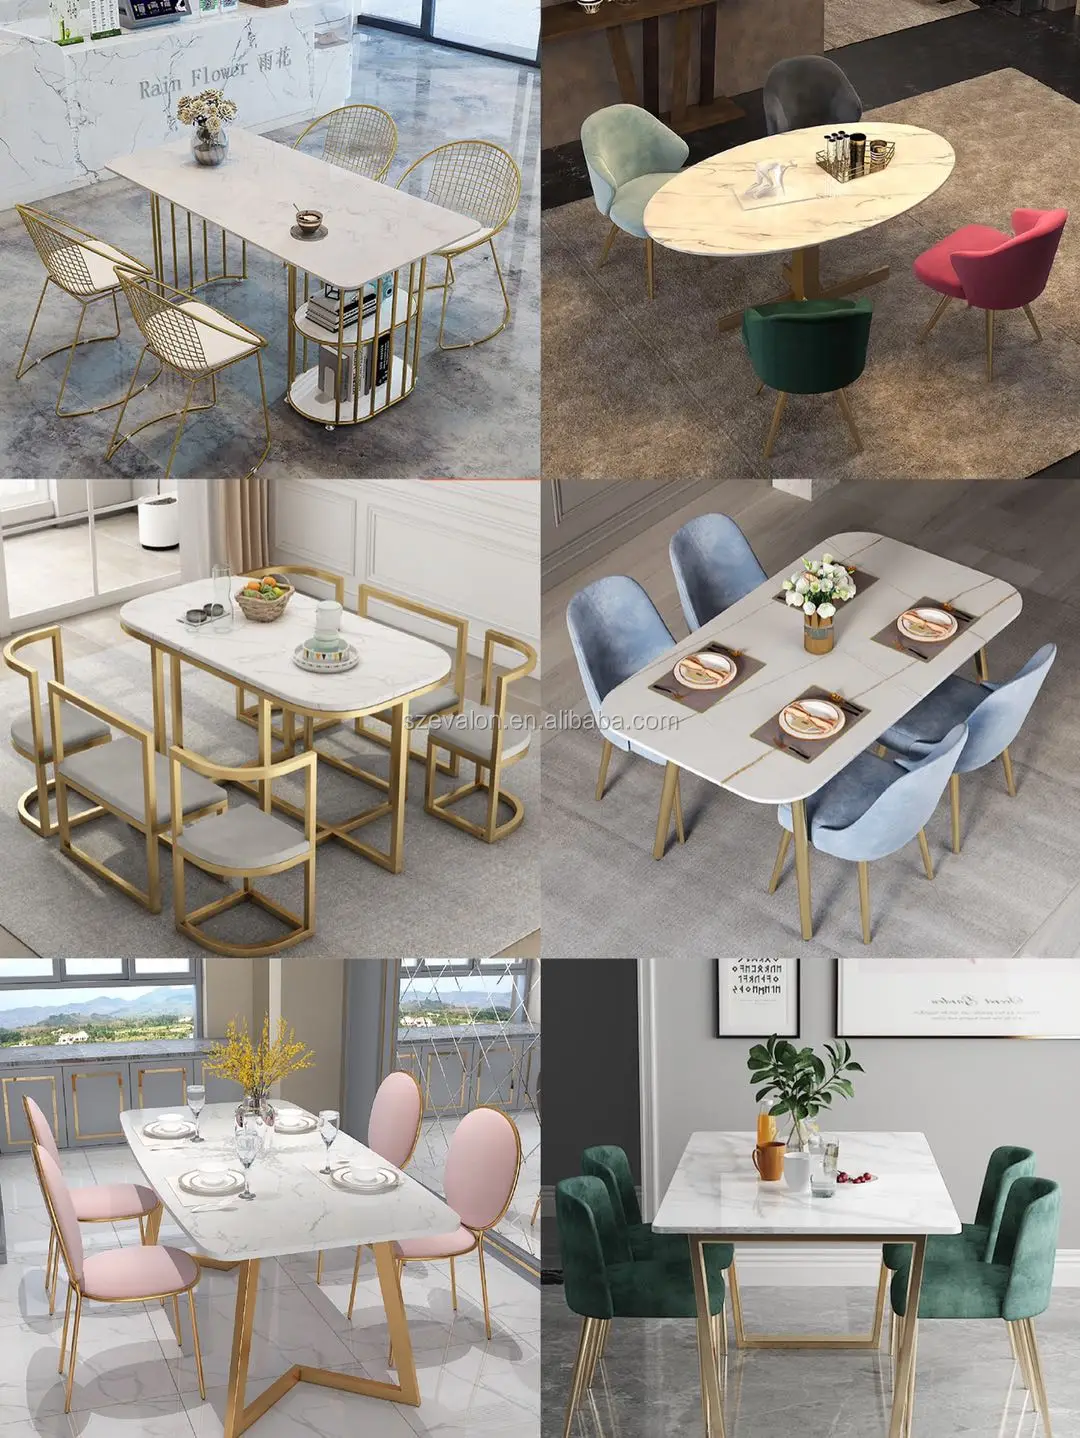 Space Saving Marble Restaurant Dining Tables Sets With 6 Chair Buy Space Saving Dining Table And Chairs